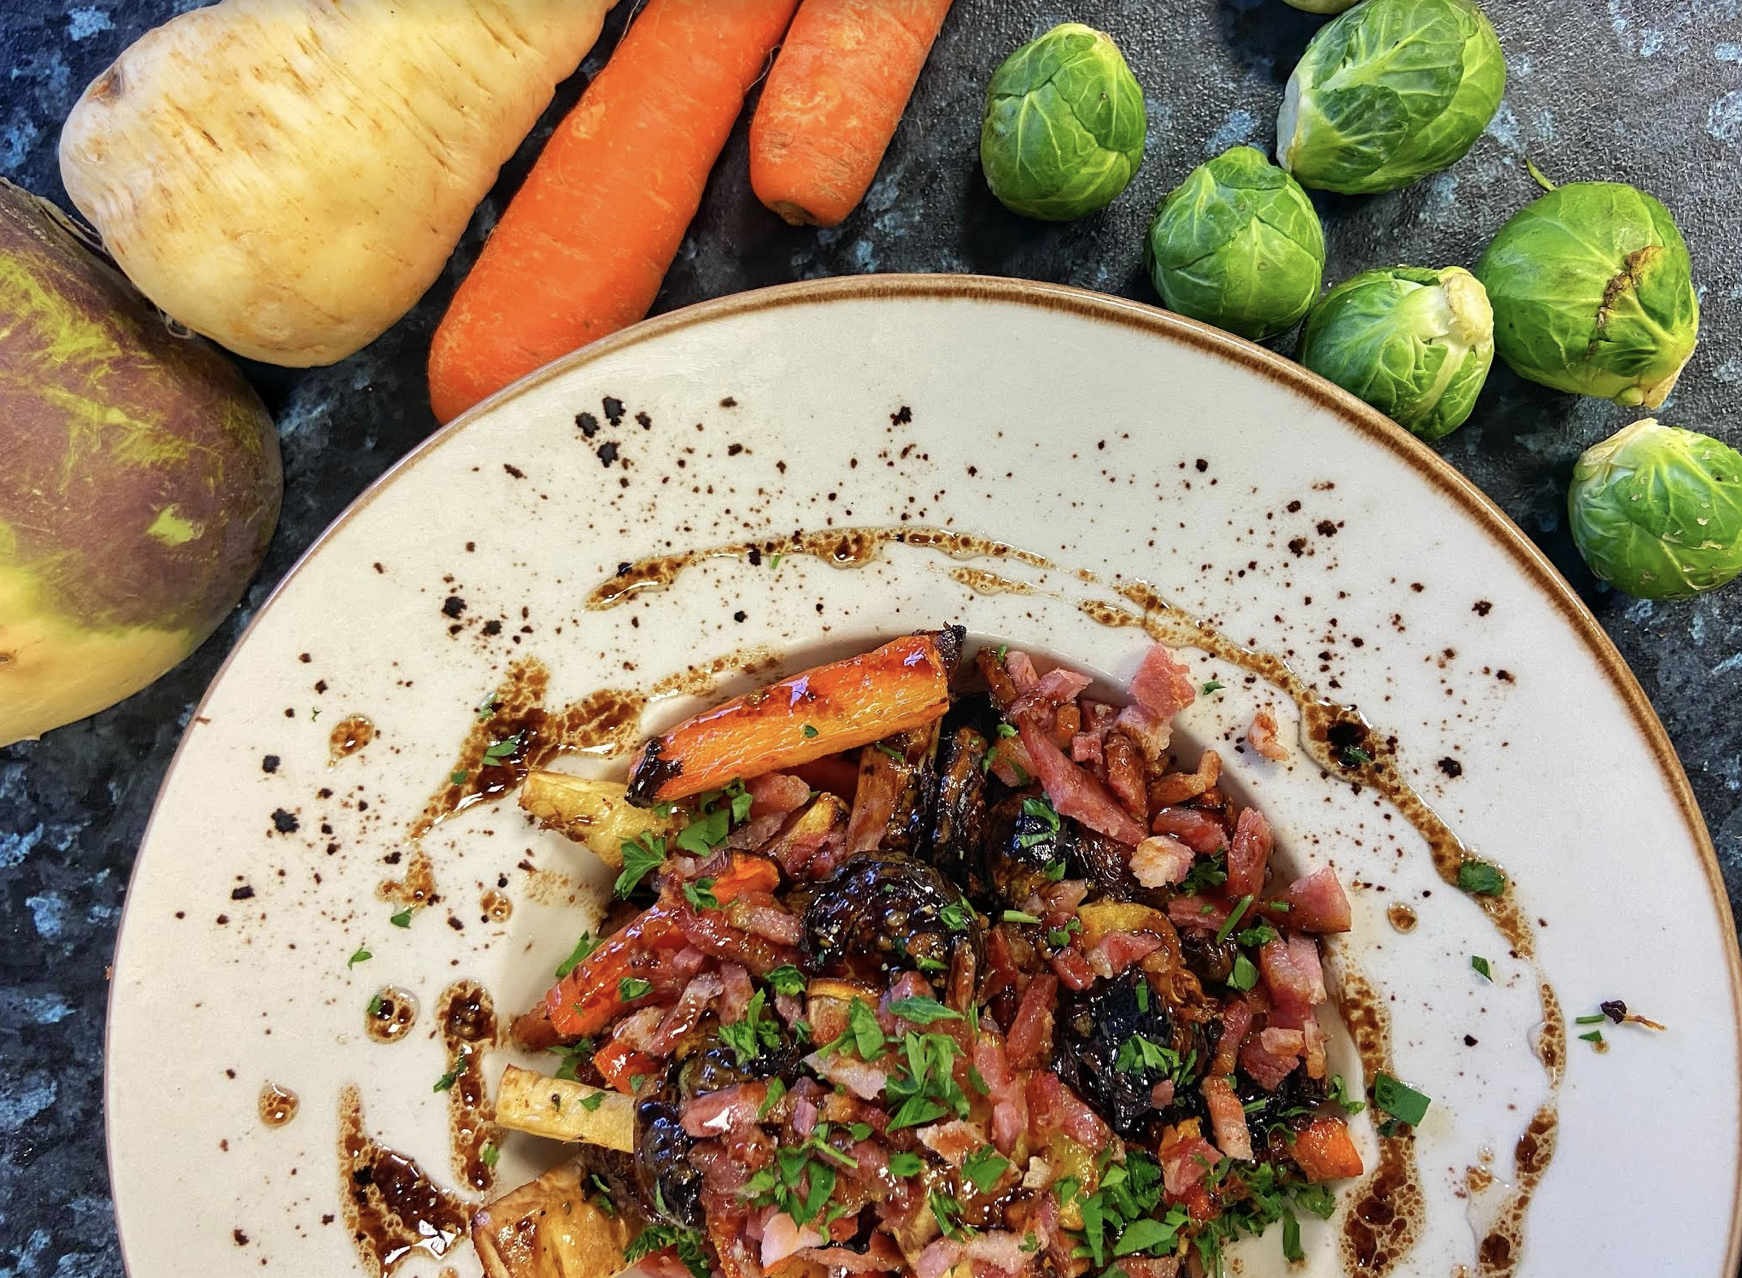 Take your Christmas dinner to the next level with this delicious veg and crunchy bacon delight